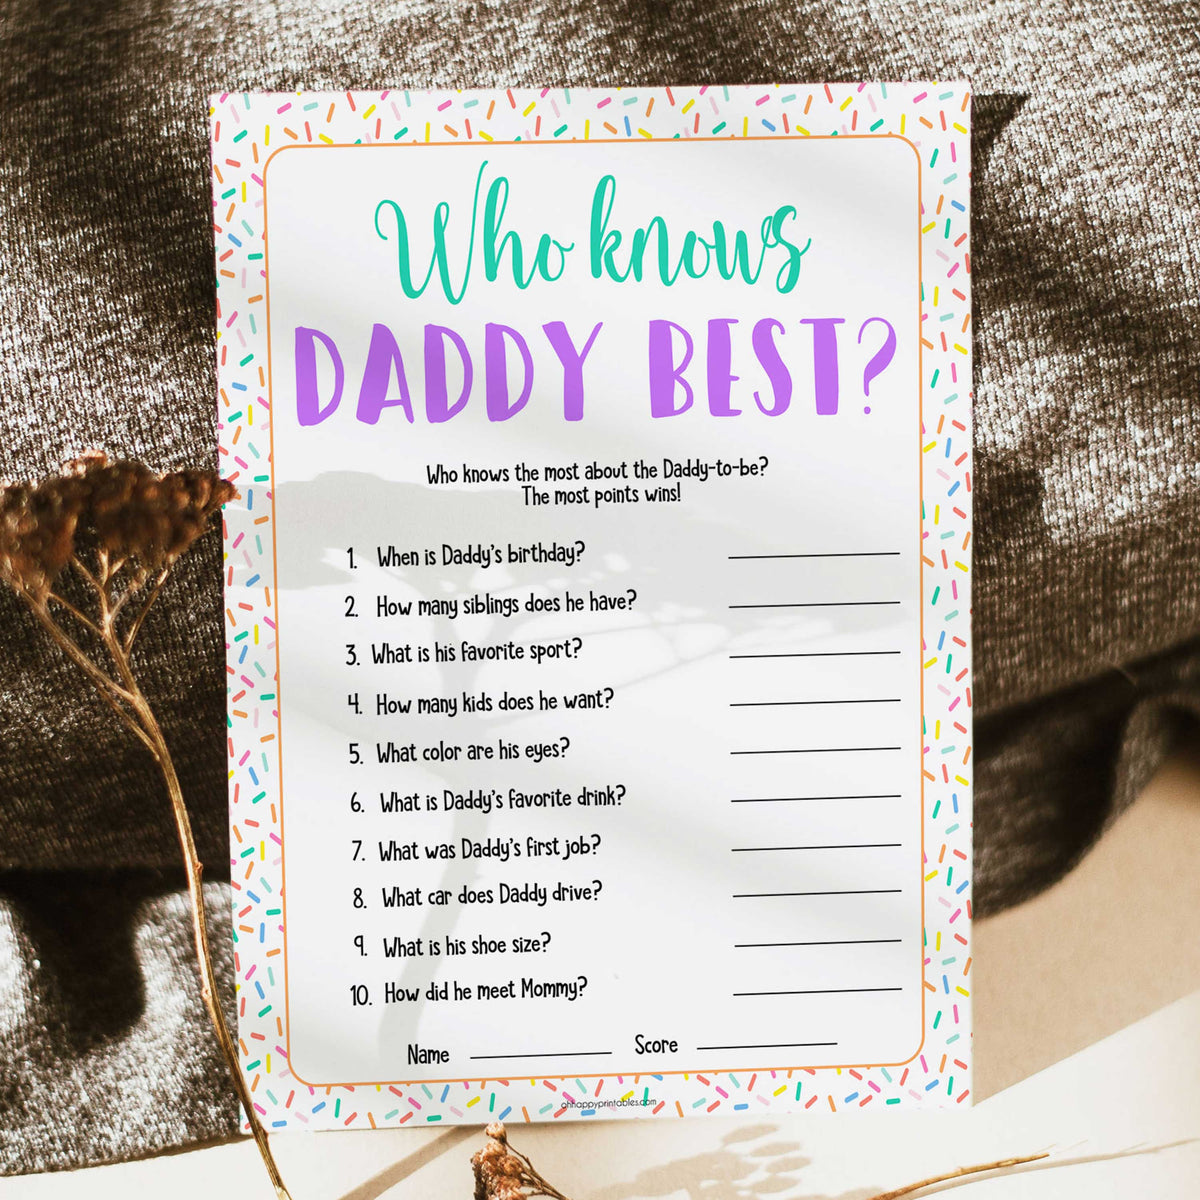 who knows daddy best, Printable baby shower games, baby sprinkle fun baby games, baby shower games, fun baby shower ideas, top baby shower ideas, sprinkle shower baby shower, friends baby shower ideas